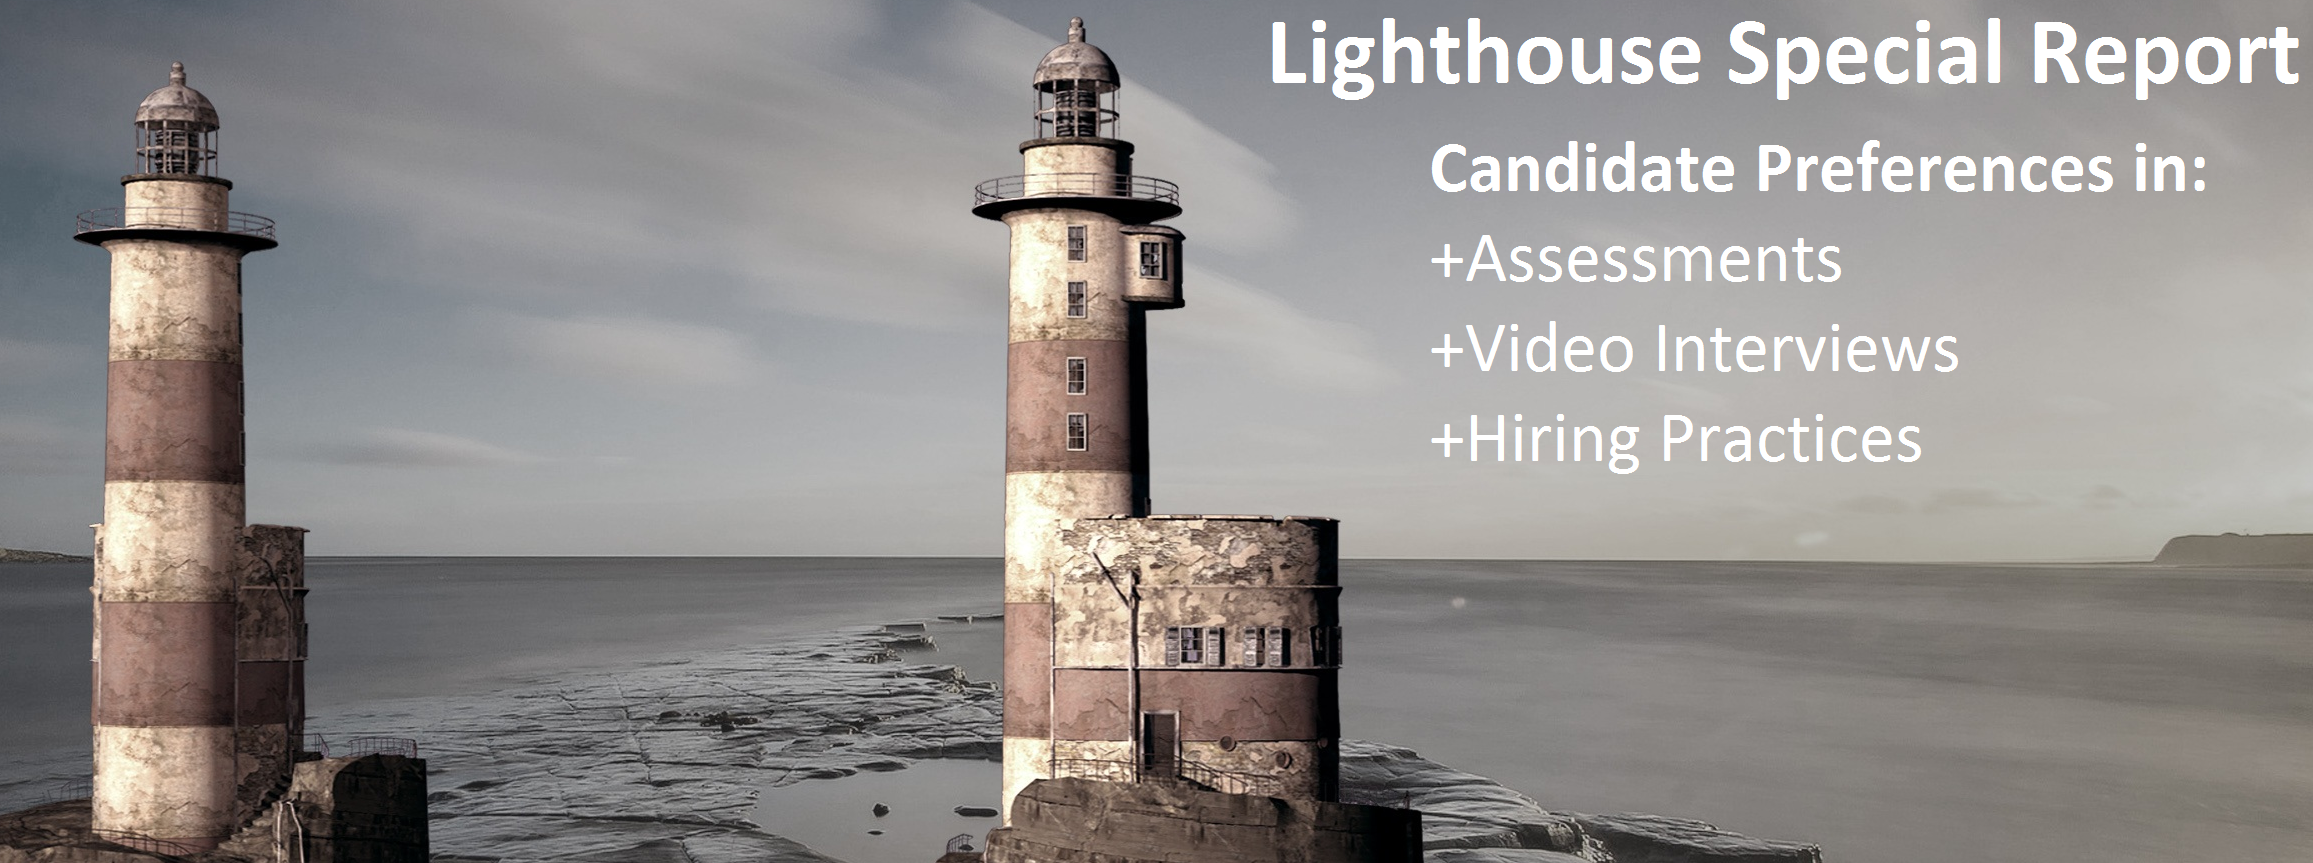 lighthouse special report